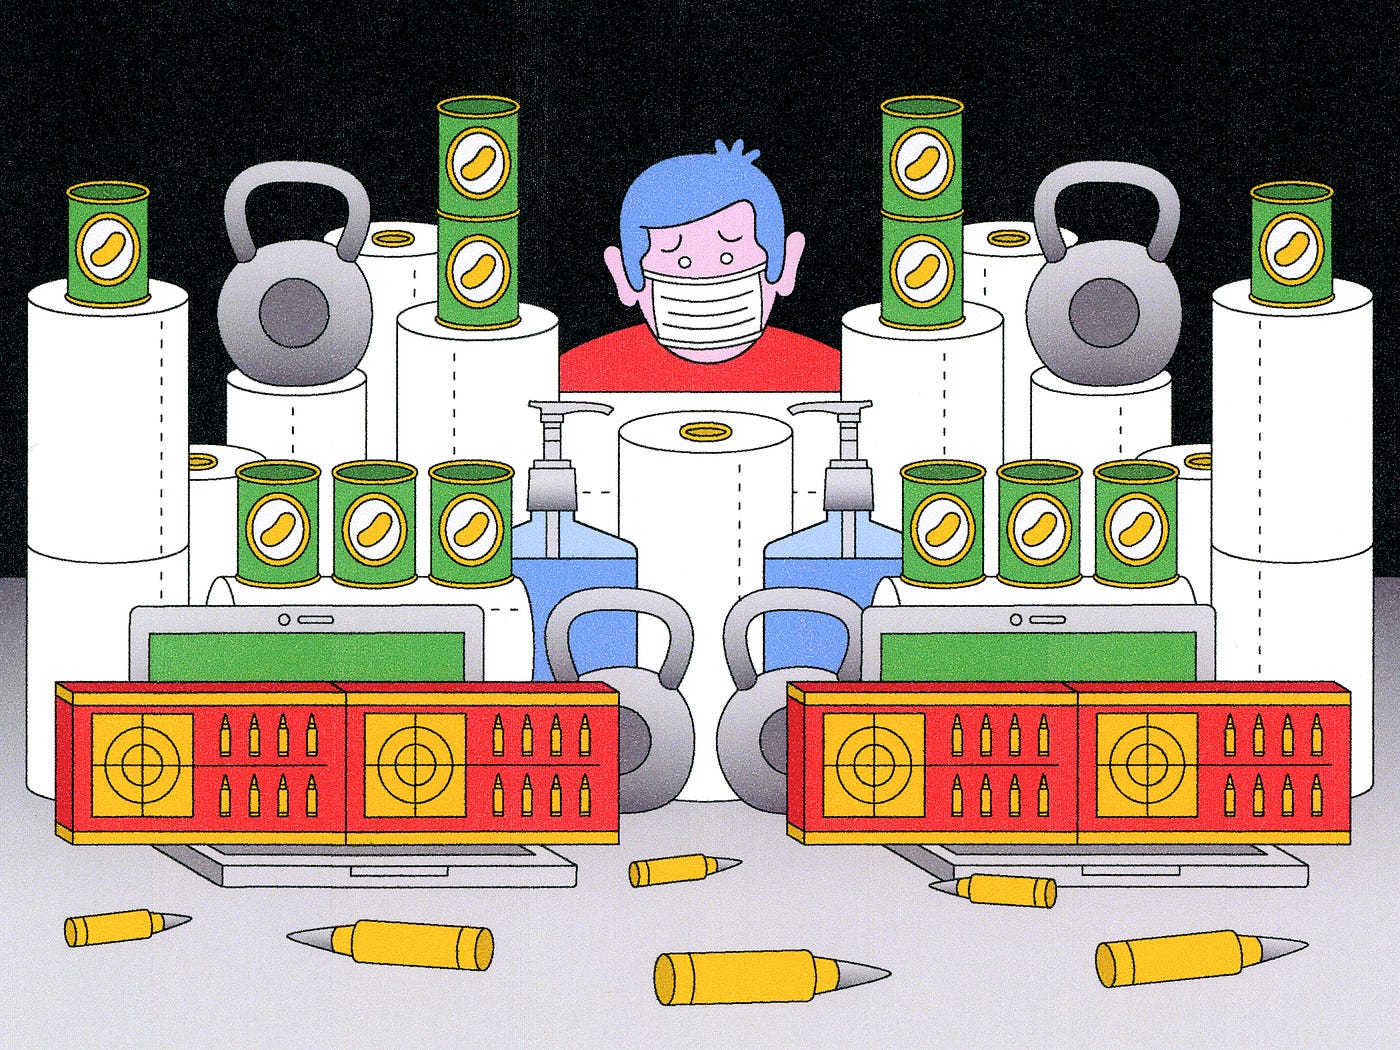 An illustration of a man wearing a face mask, surrounded by a stockpile of toilet paper, weapons ammo, kettlebells, and cans.